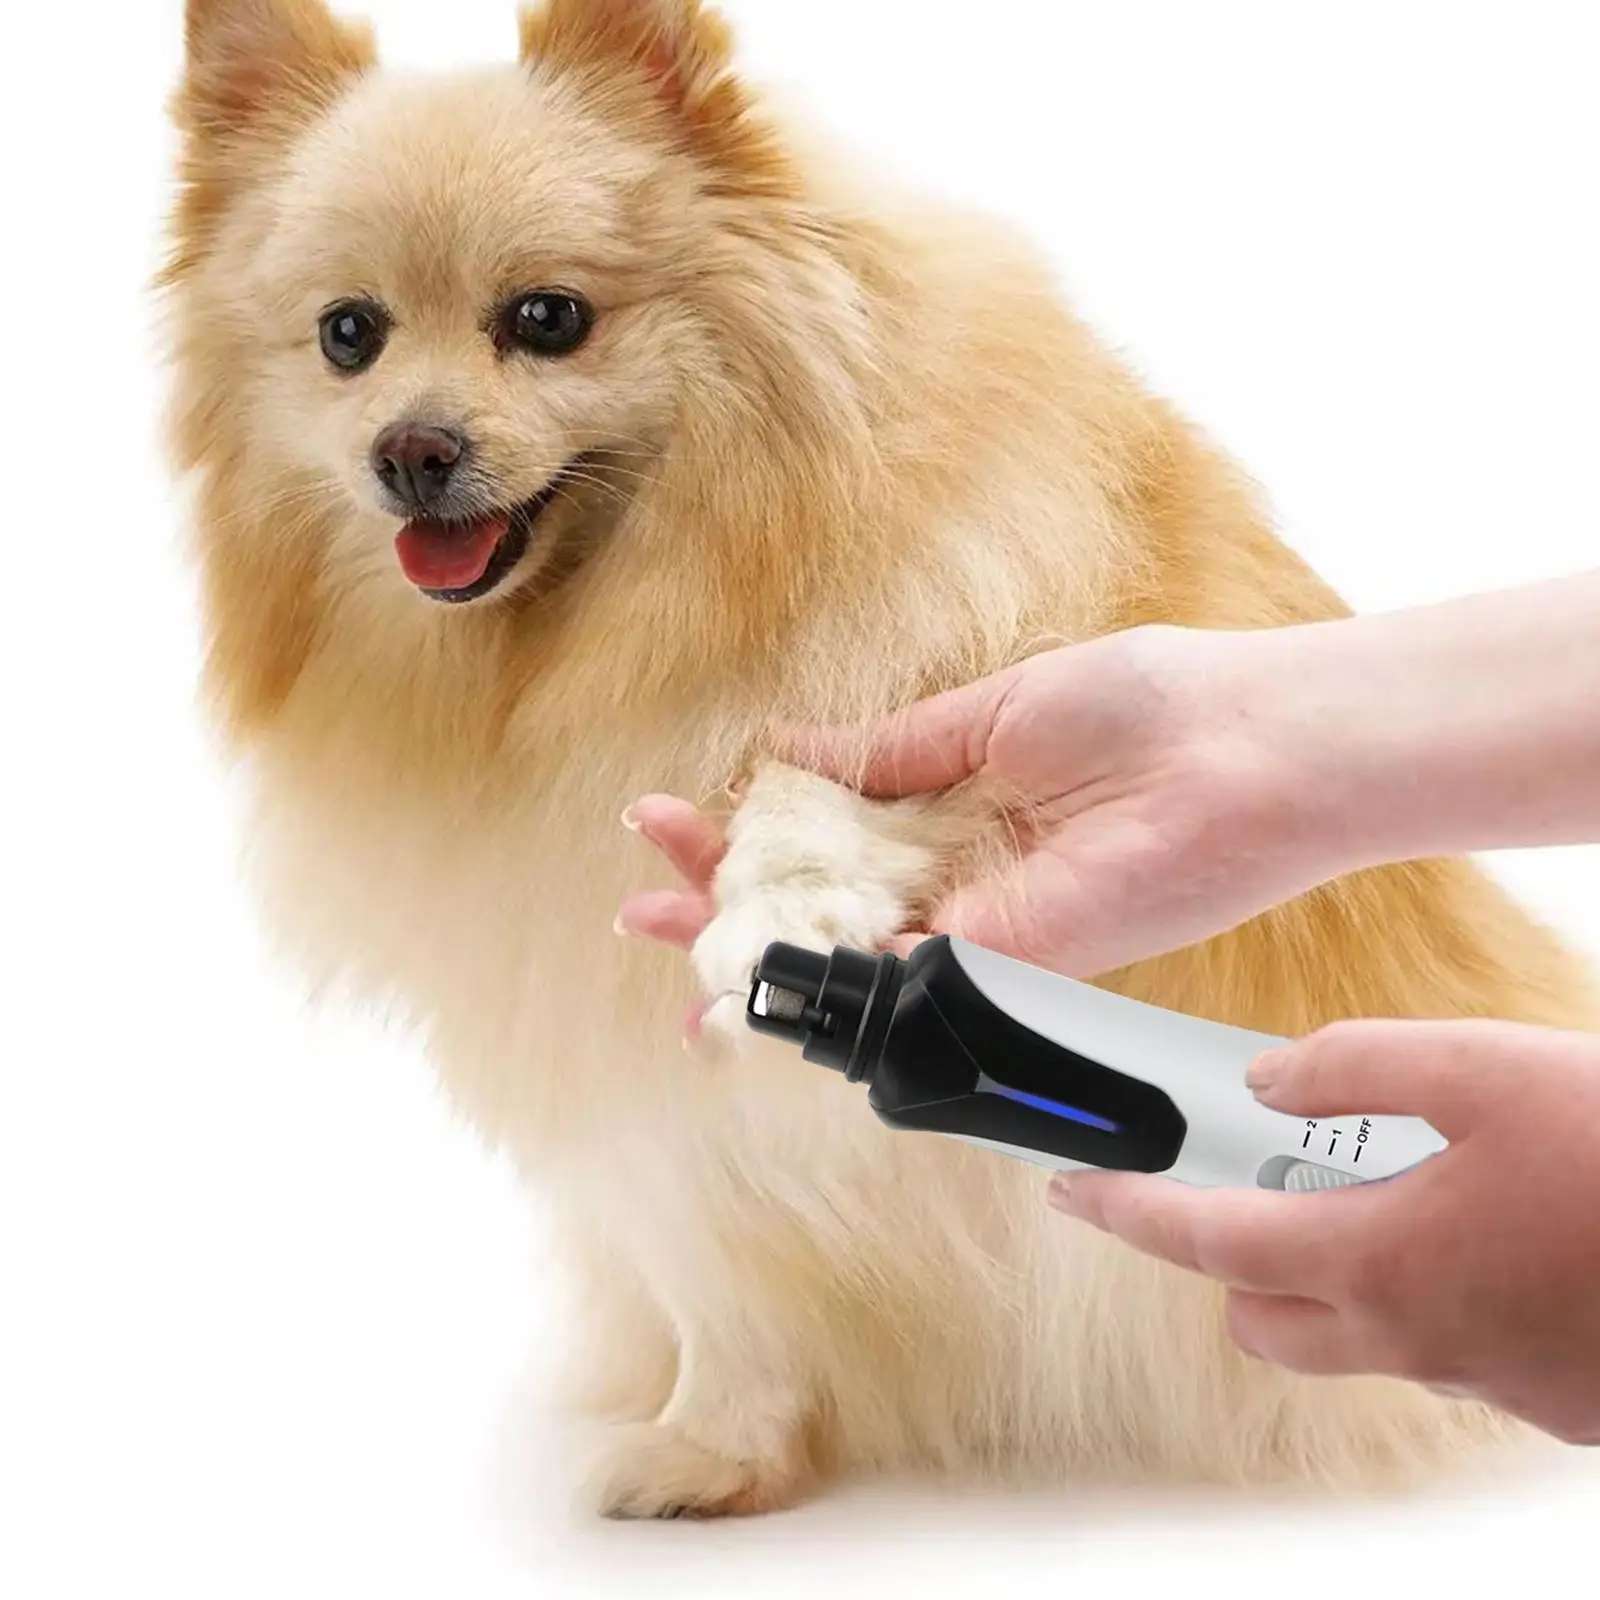 Dog Nail Grinder Painless Quiet Paws Grooming & Smoothing Dog Nail Clippers